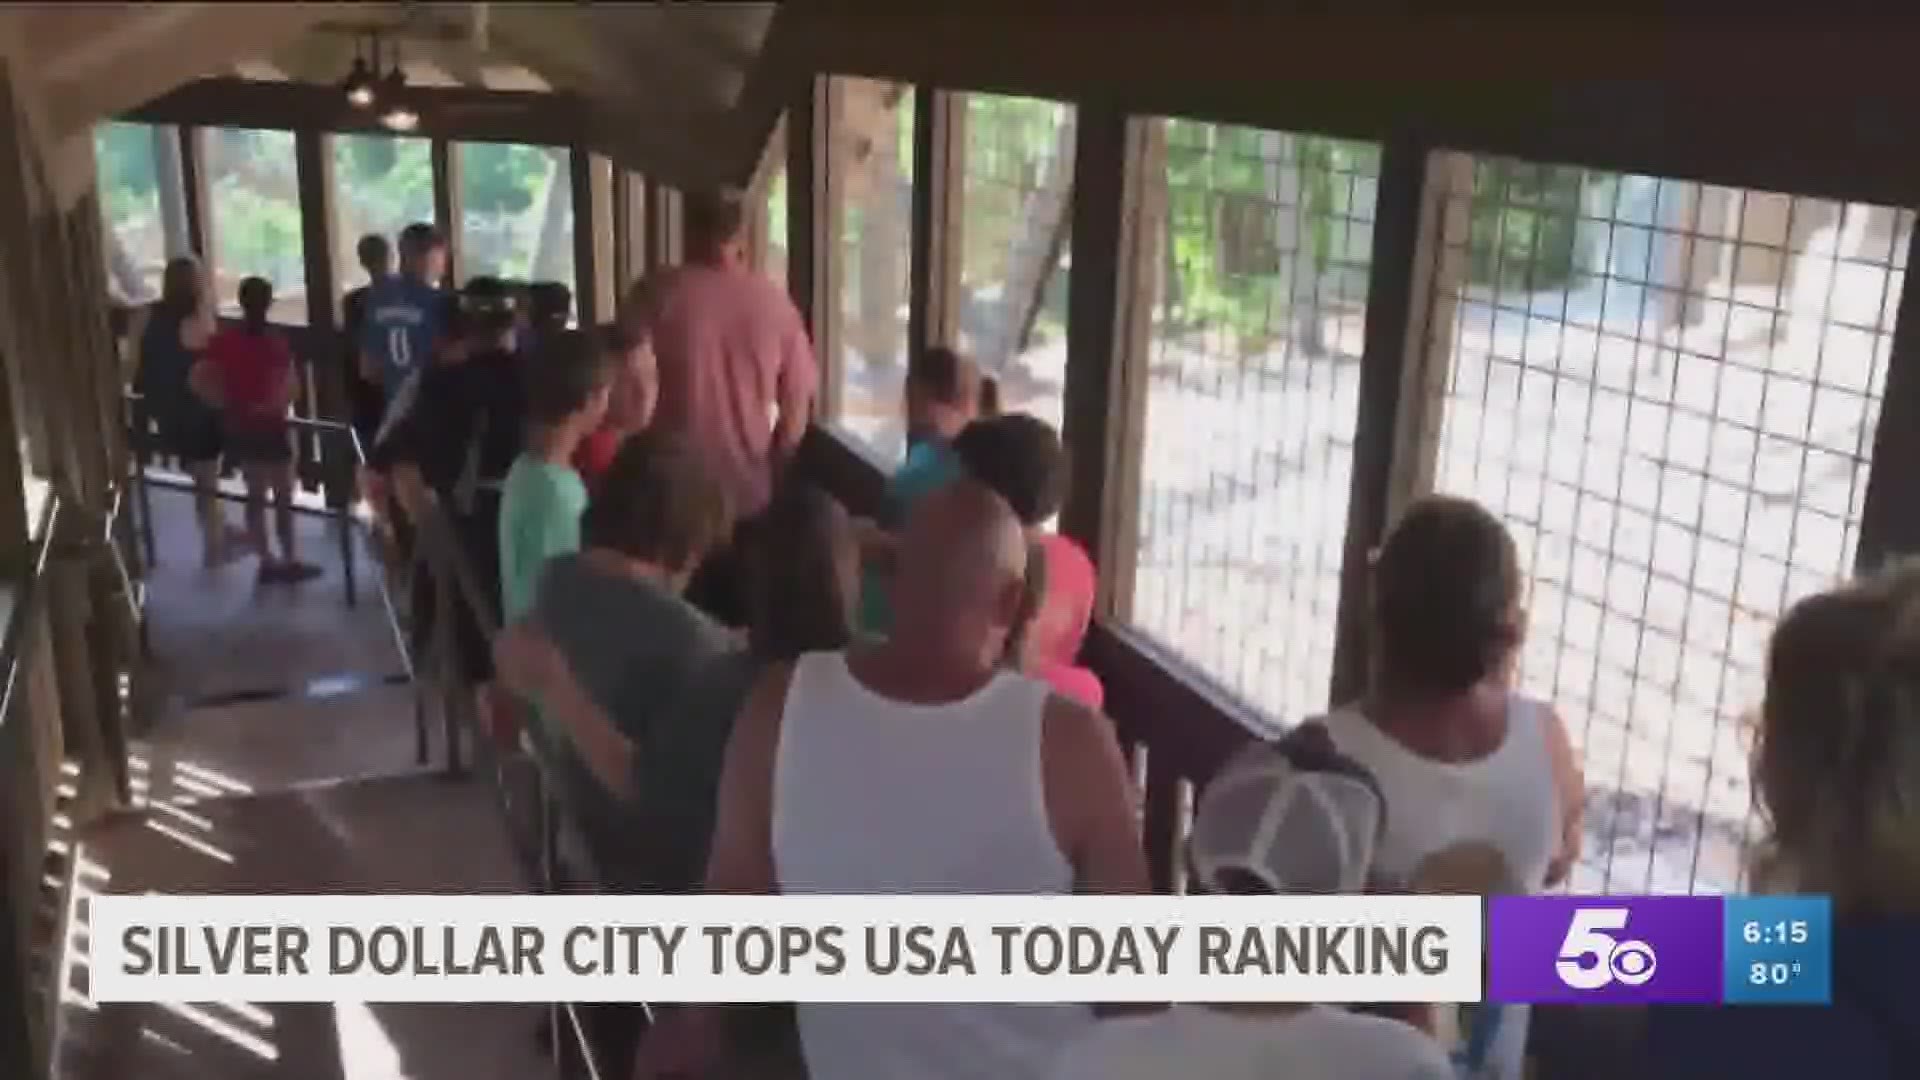 In total, Silver Dollar City was awarded three amusement-related awards in the nationwide poll of USA Today readers. https://bit.ly/3k0REX6